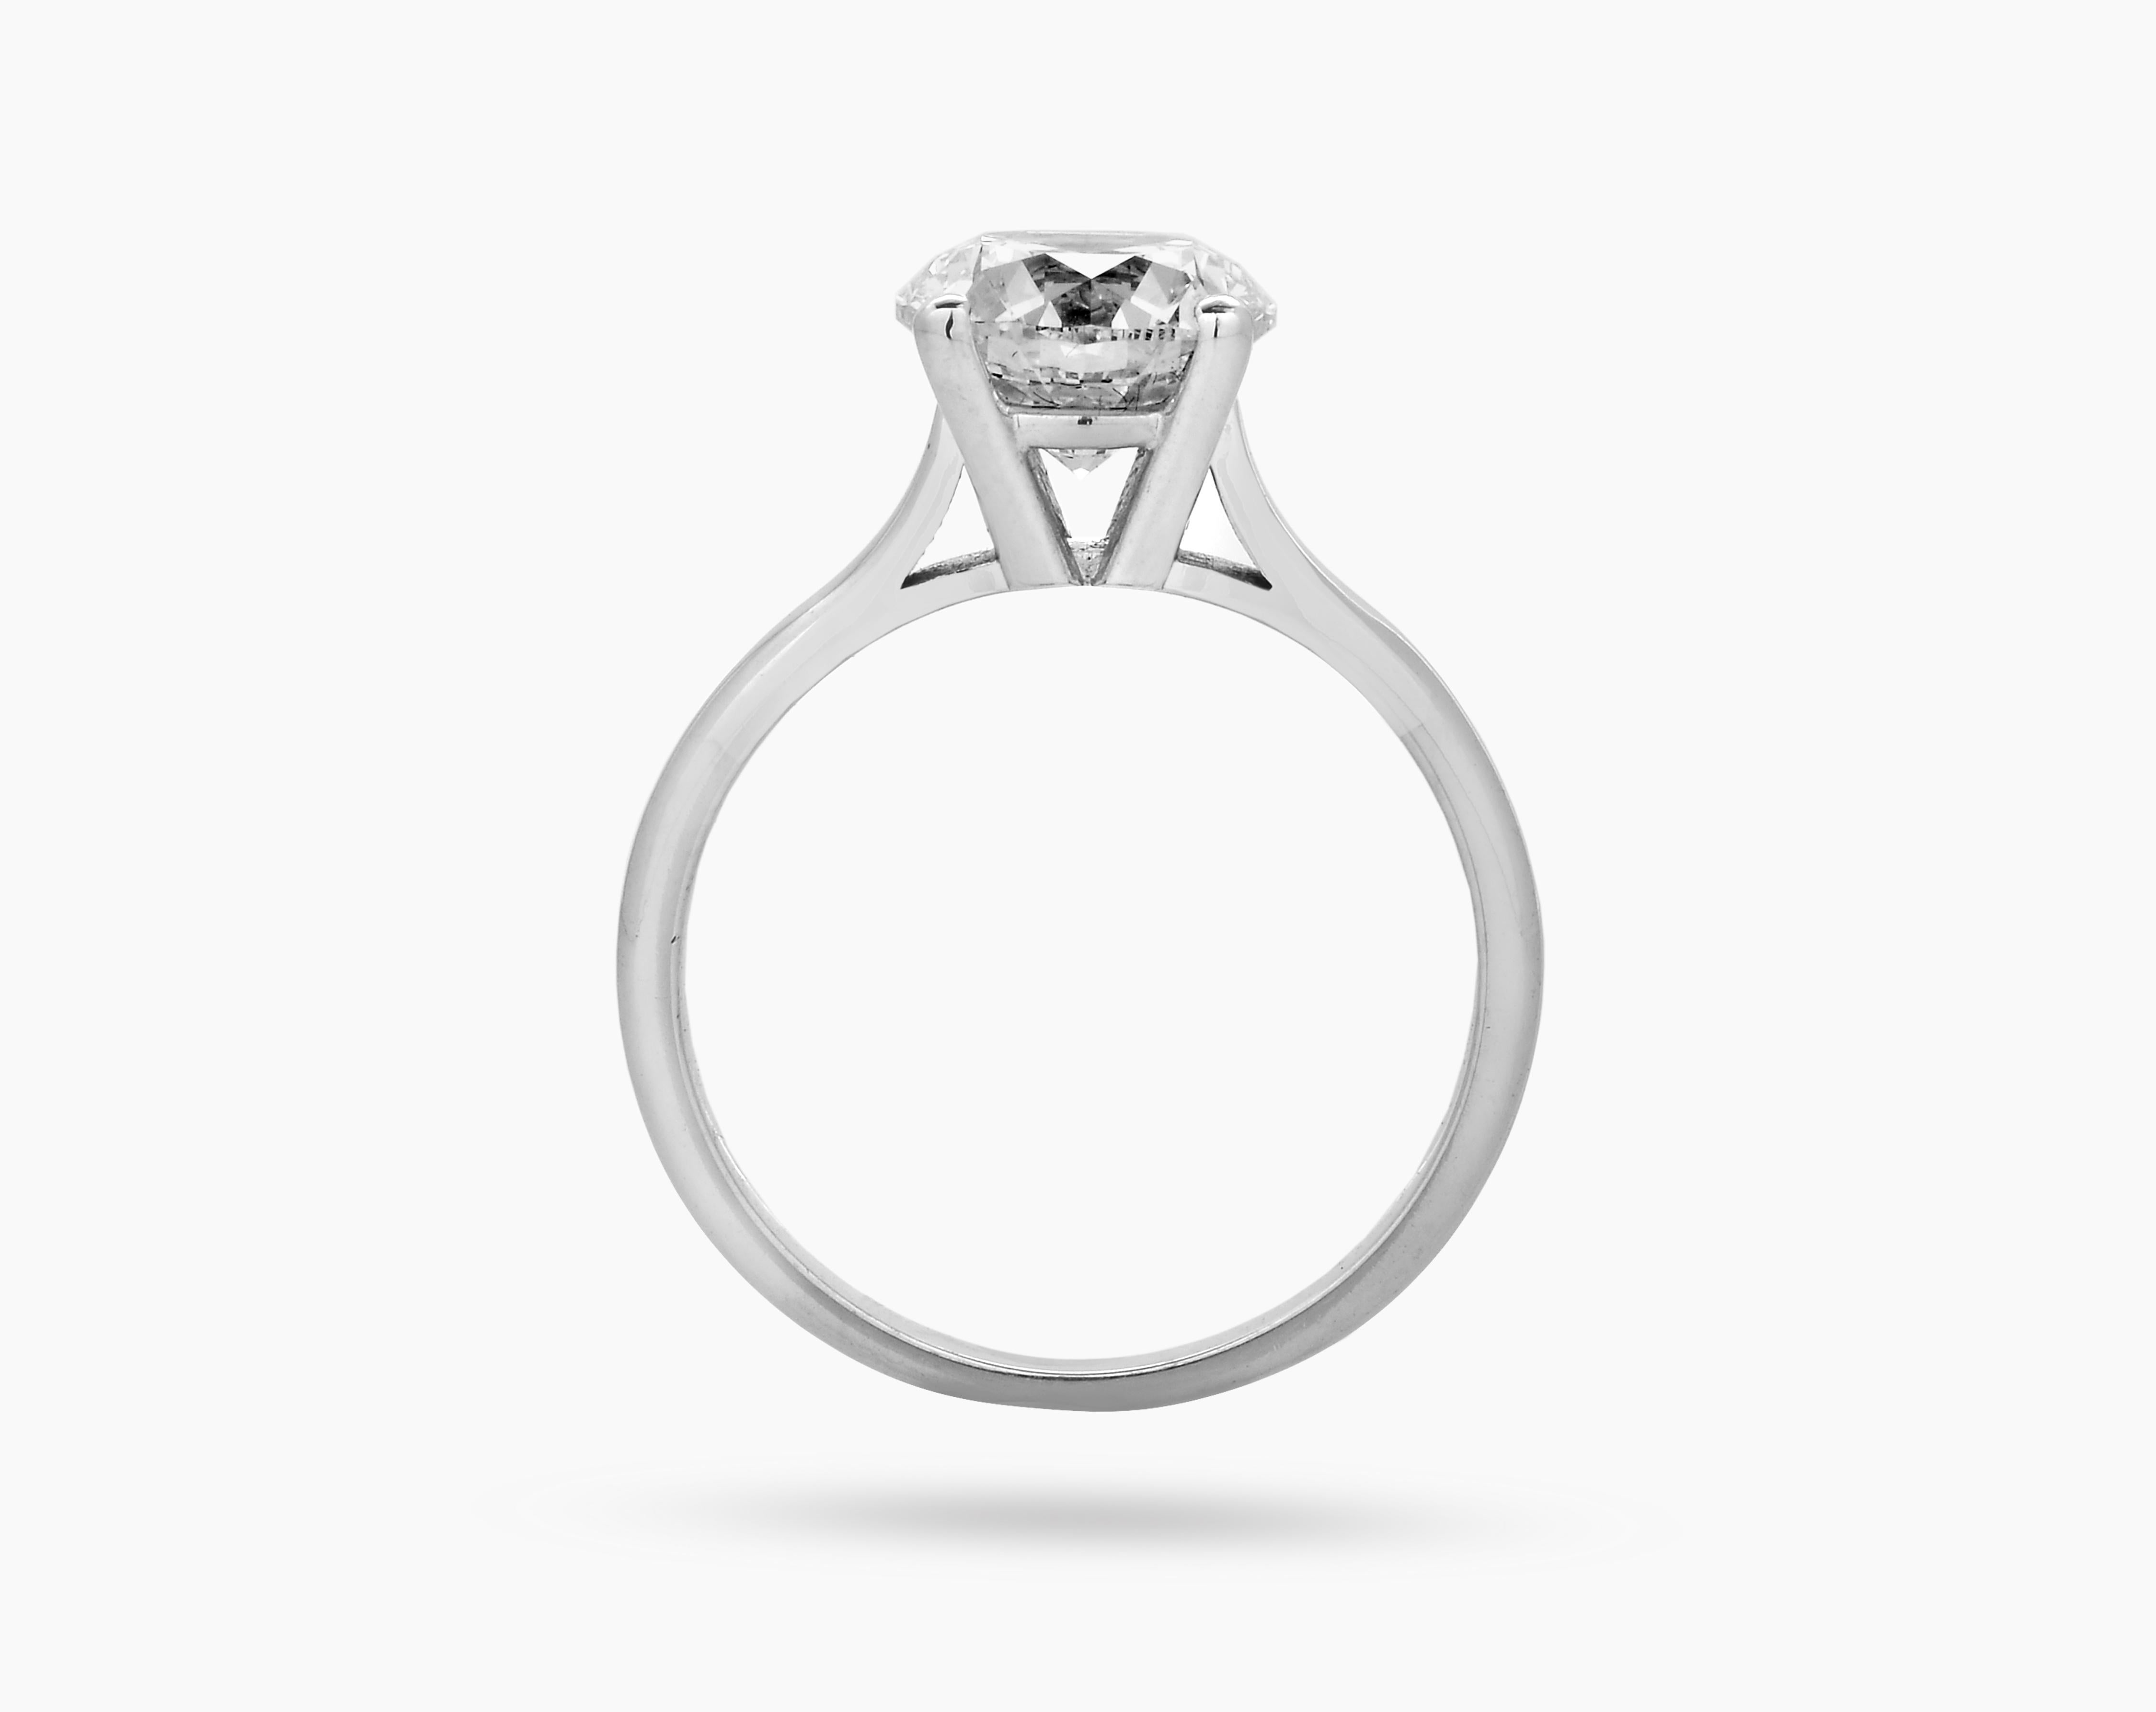 Contemporary 2.01 ct HRD Classic Solitaire Diamond Ring in 18k White Gold For Sale